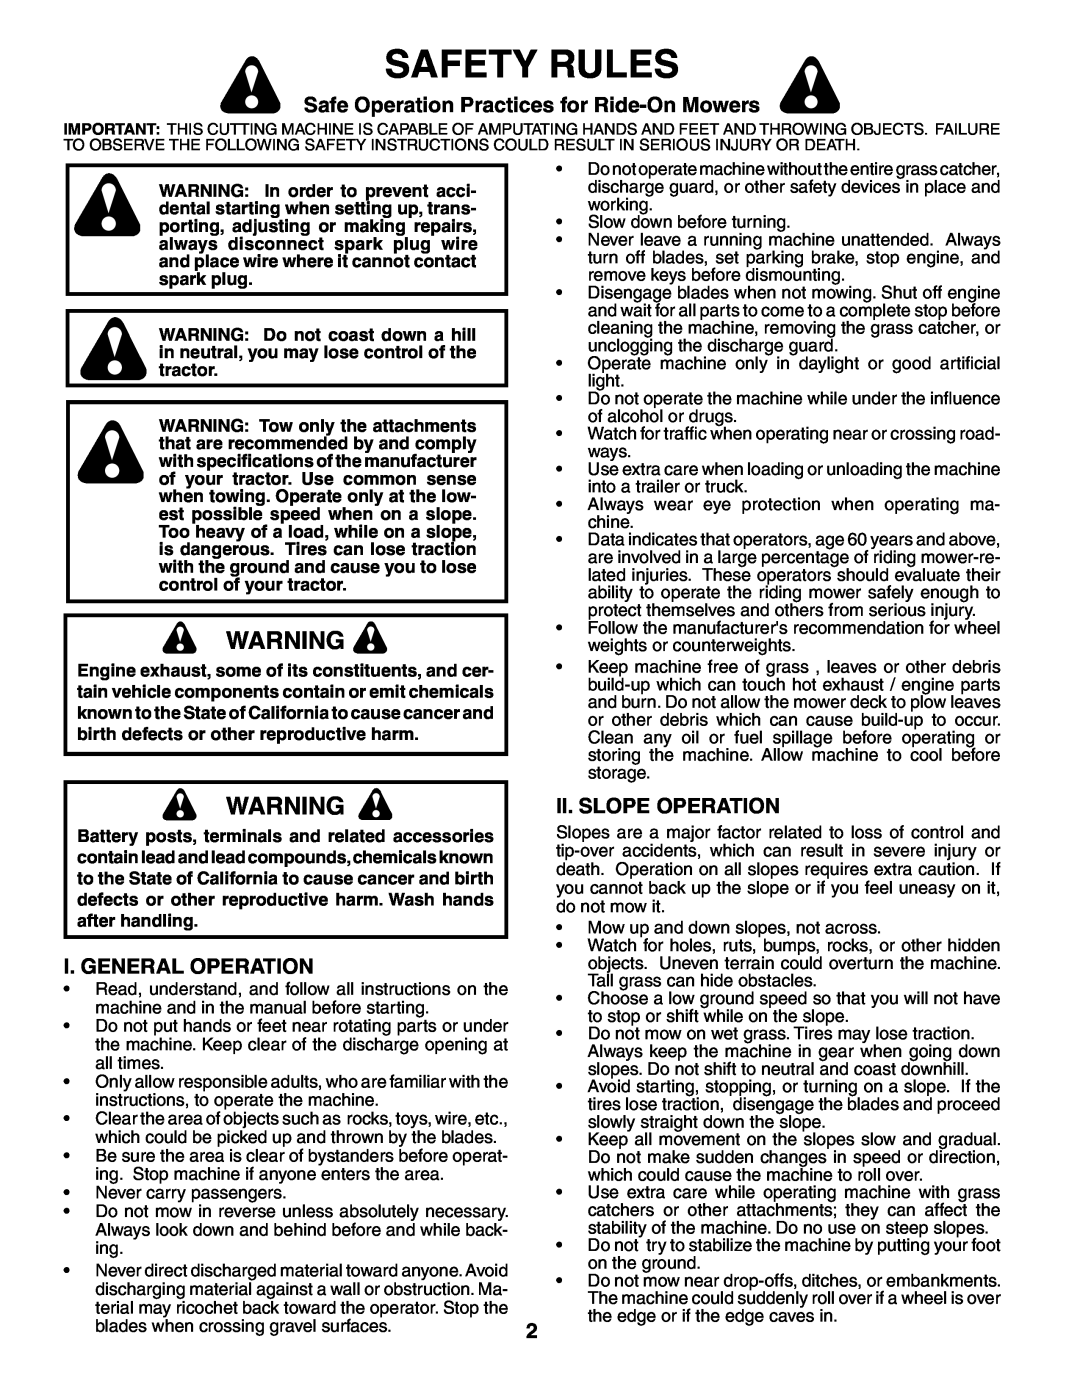 Weed Eater WE13538LT Safety Rules, Safe Operation Practices for Ride-On Mowers, I. General Operation, Ii. Slope Operation 